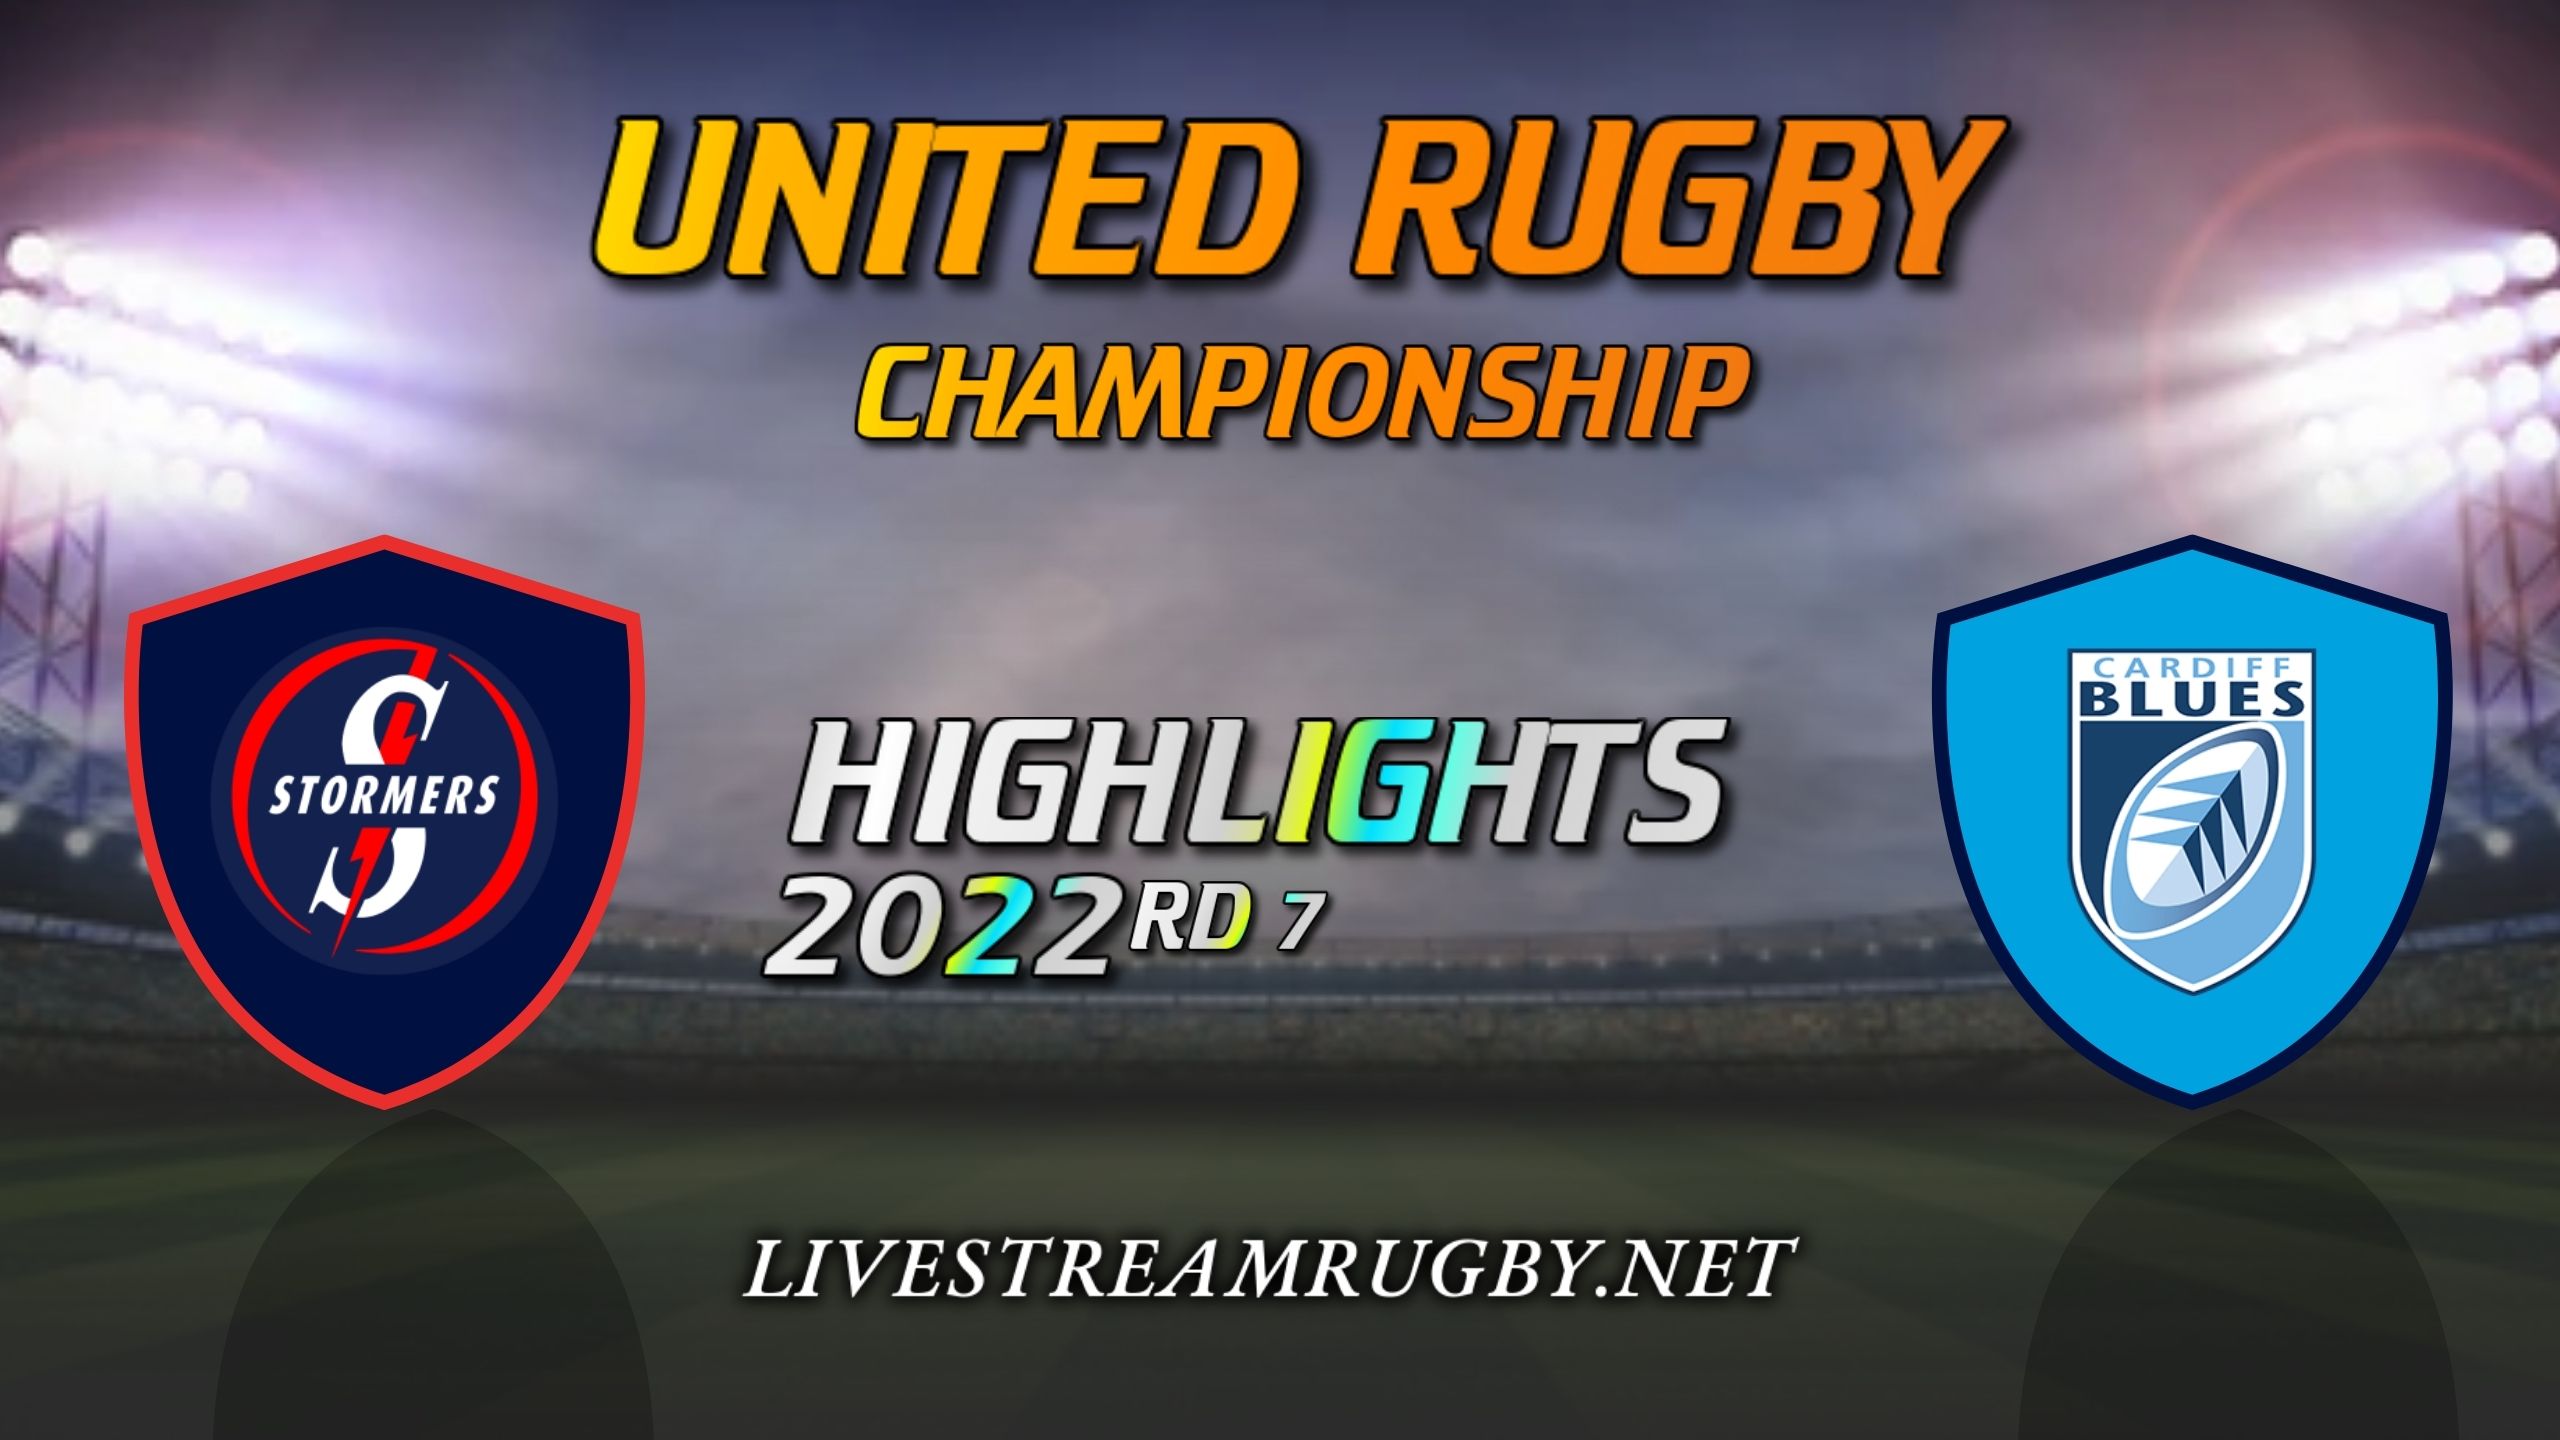 Stormers Vs Cardiff Highlights 2022 Rd 7 United Rugby